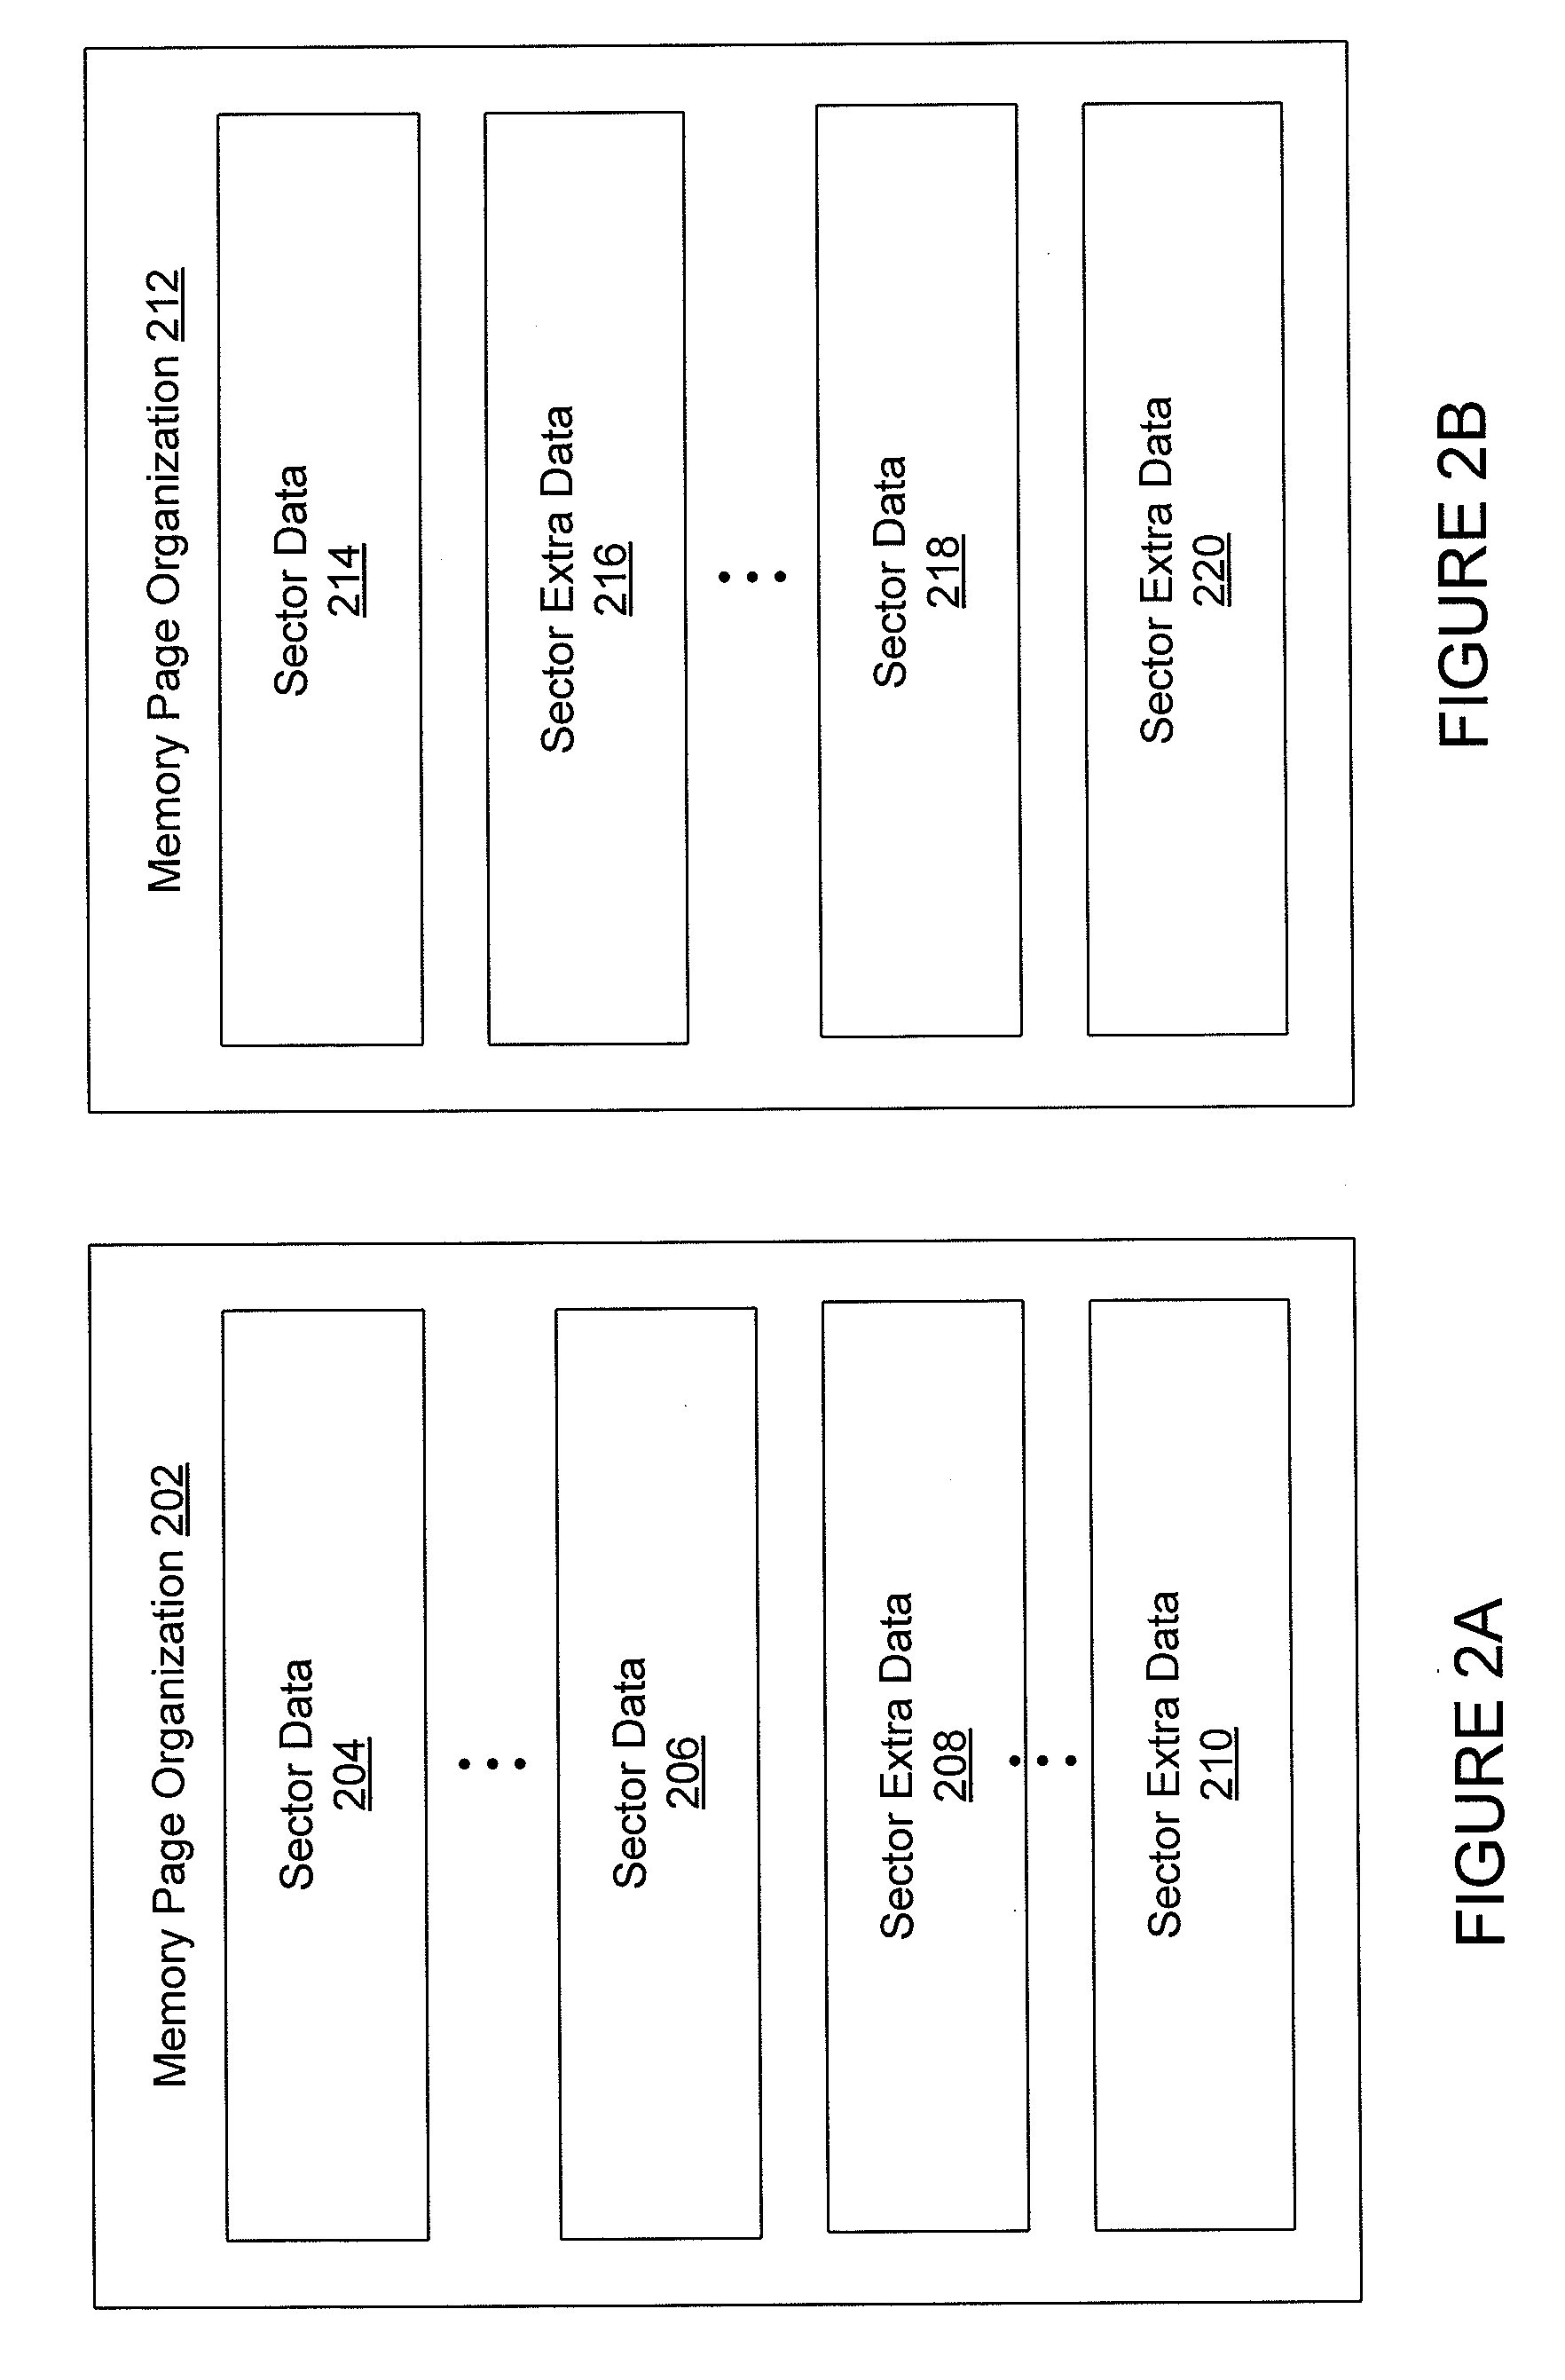 Logical-to-Physical Address Translation for a Removable Data Storage Device